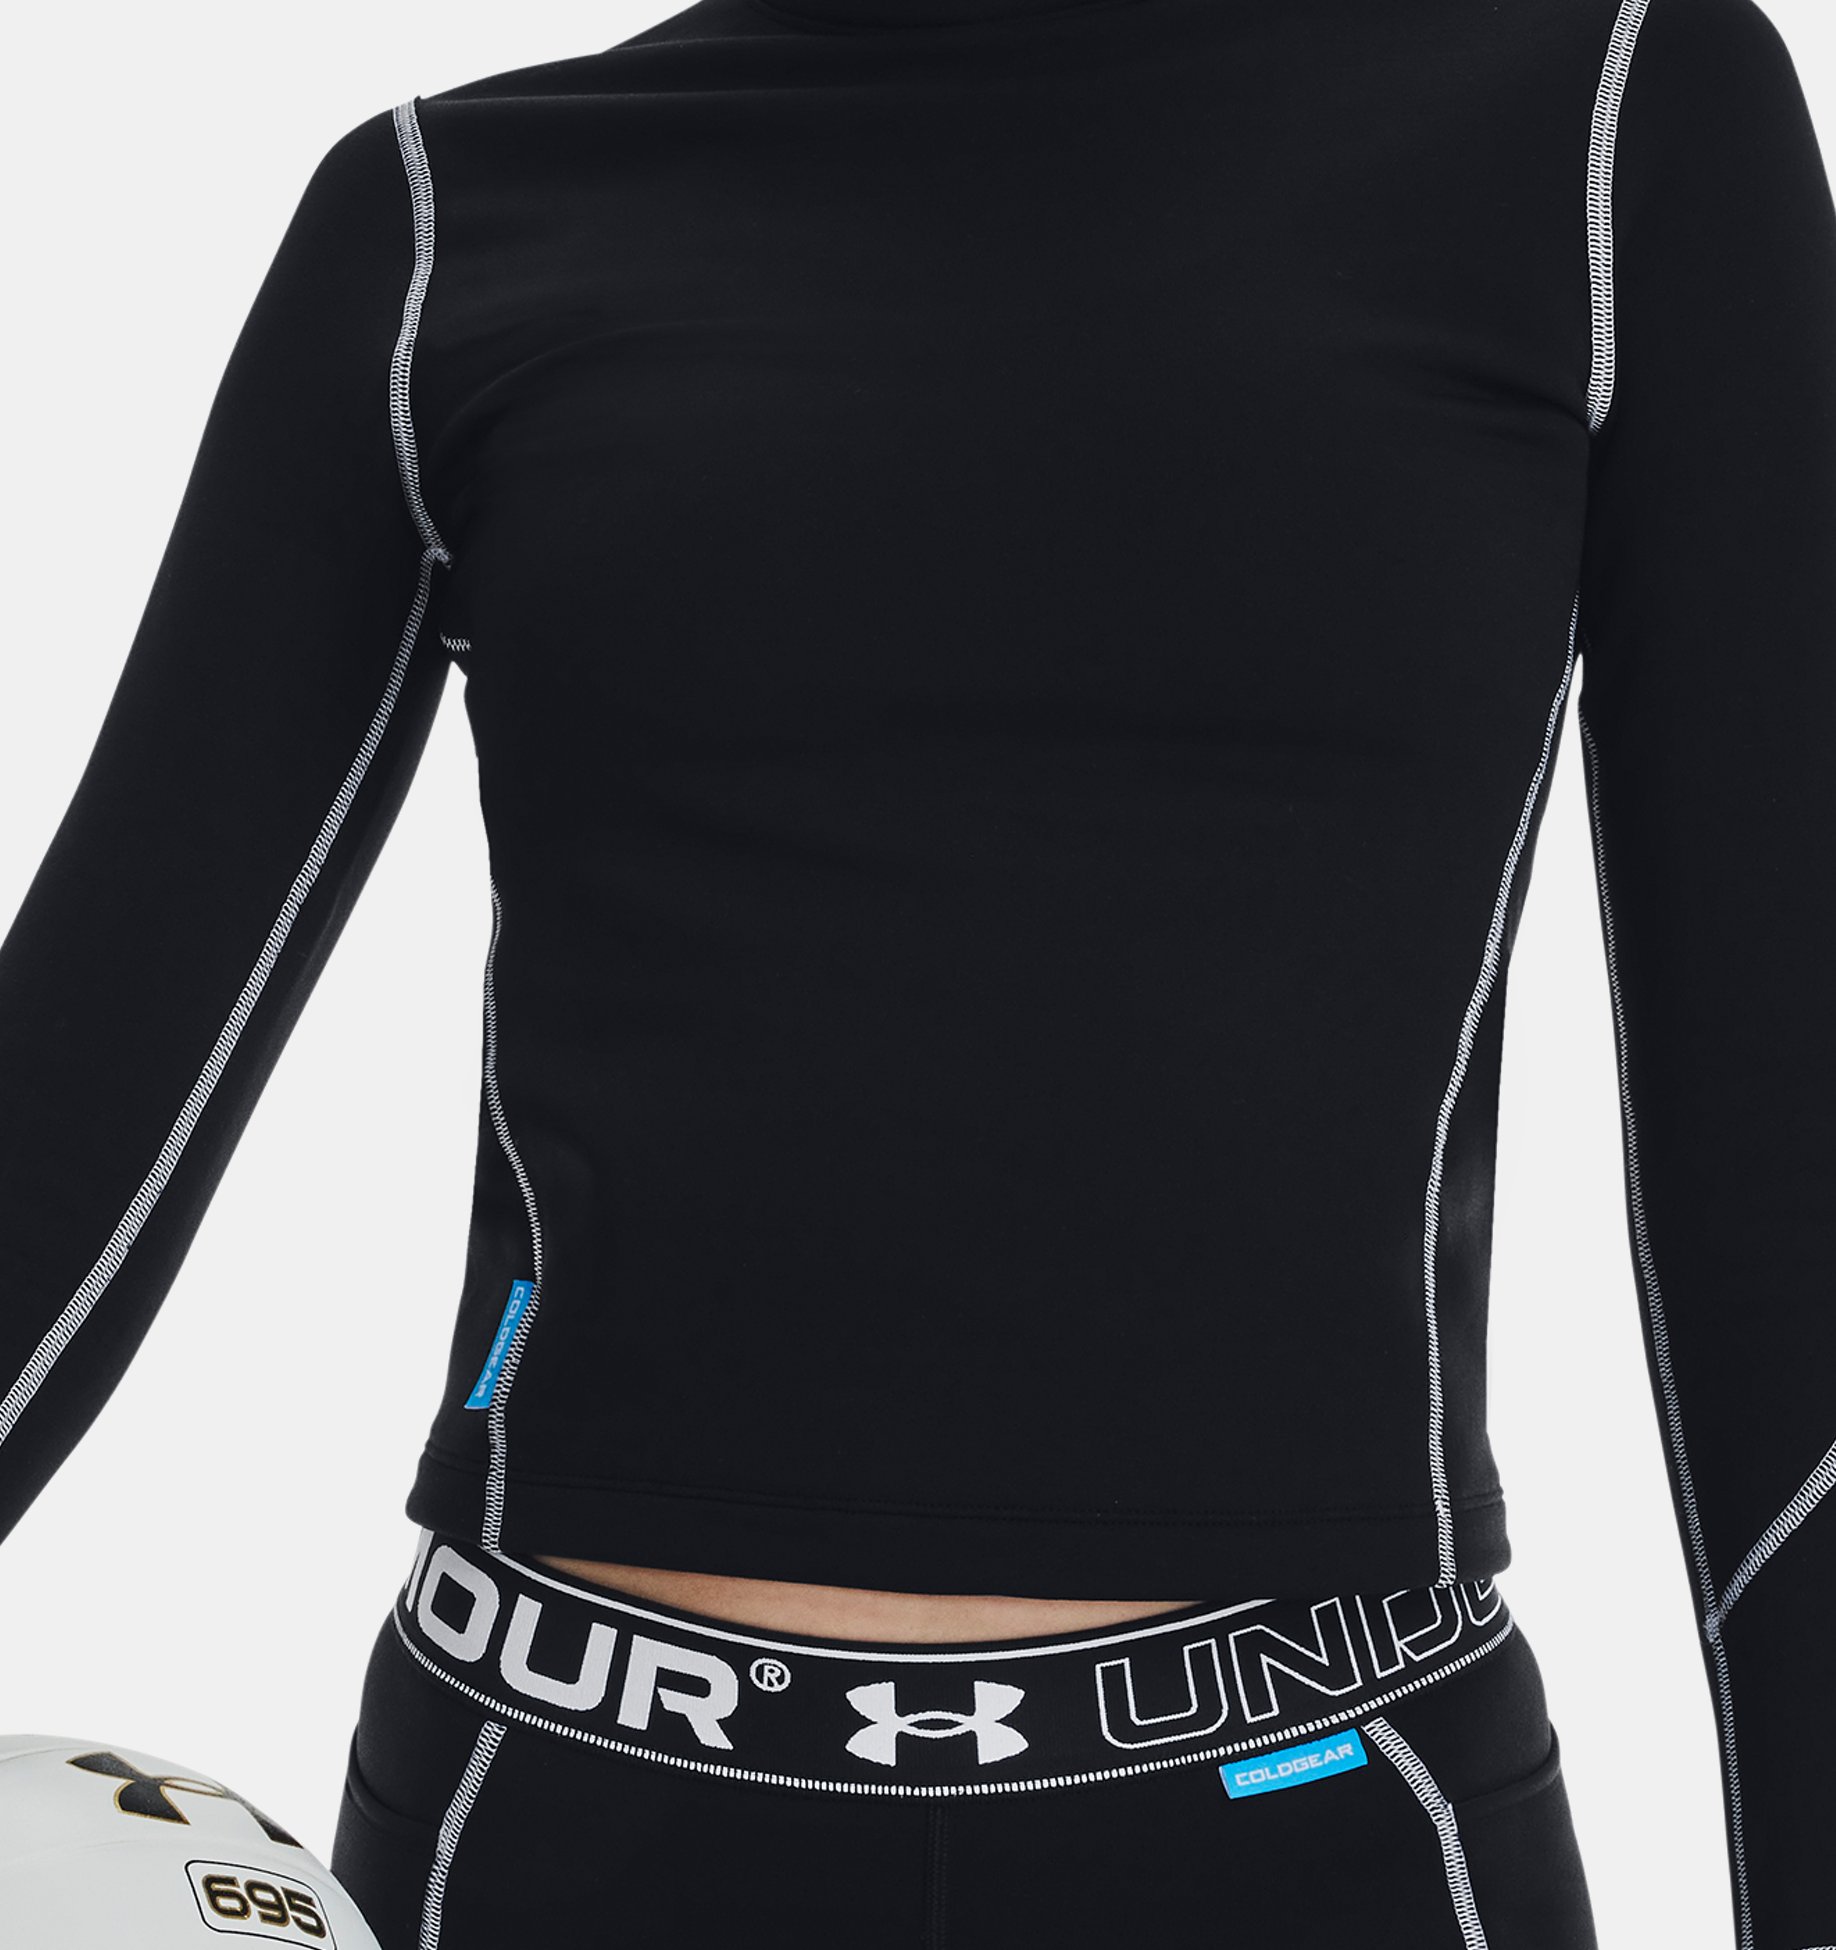 Under Armour Womens Cold Gear Compression LS Mock Neck Royal Size